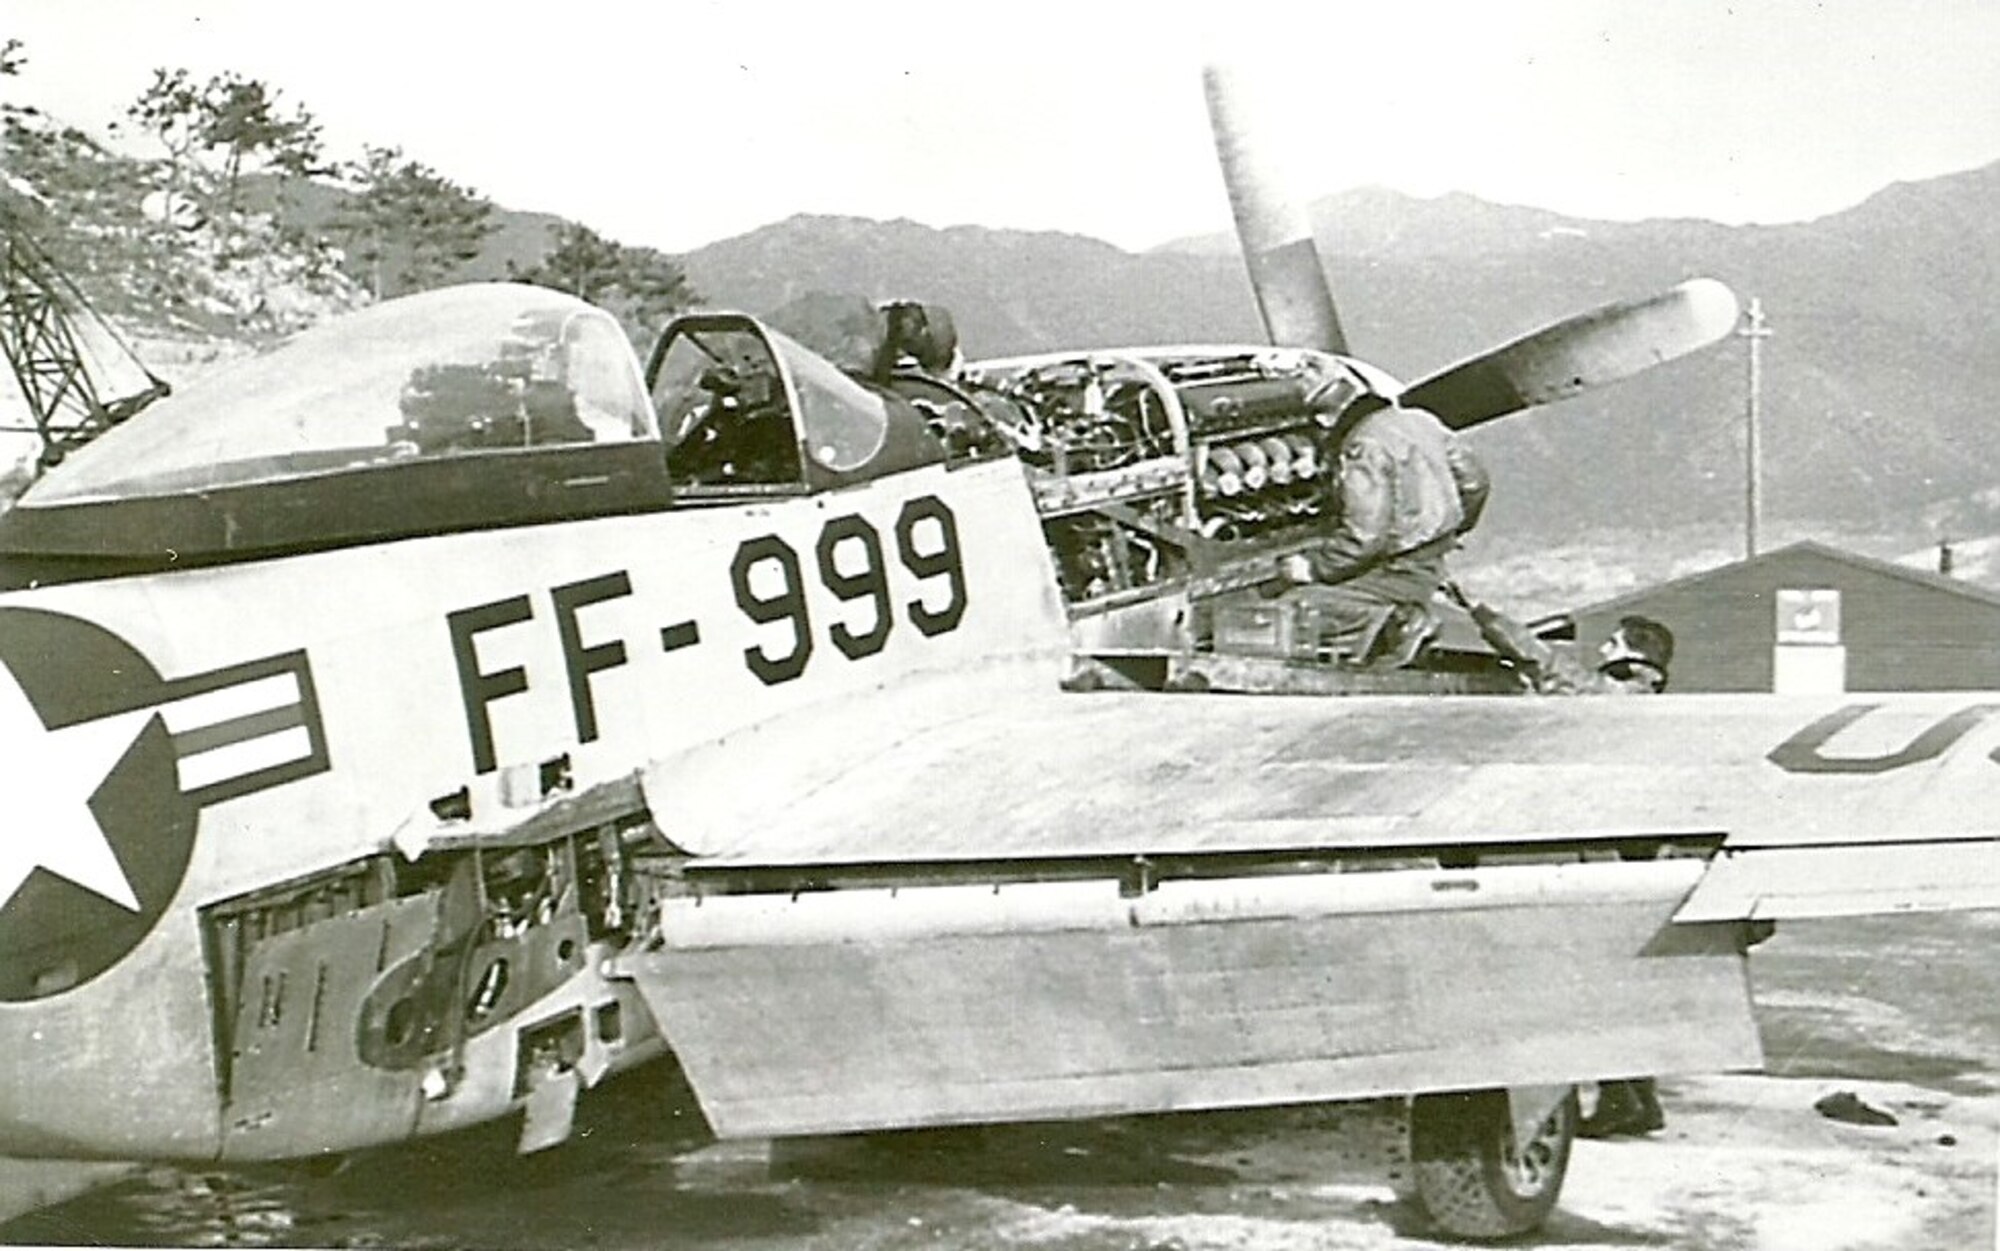 “Ernie’s” Mustang, FF-999, undergoes a 100 hour inspection by a maintenance team, K-46 Air Base, Korea, 1951.